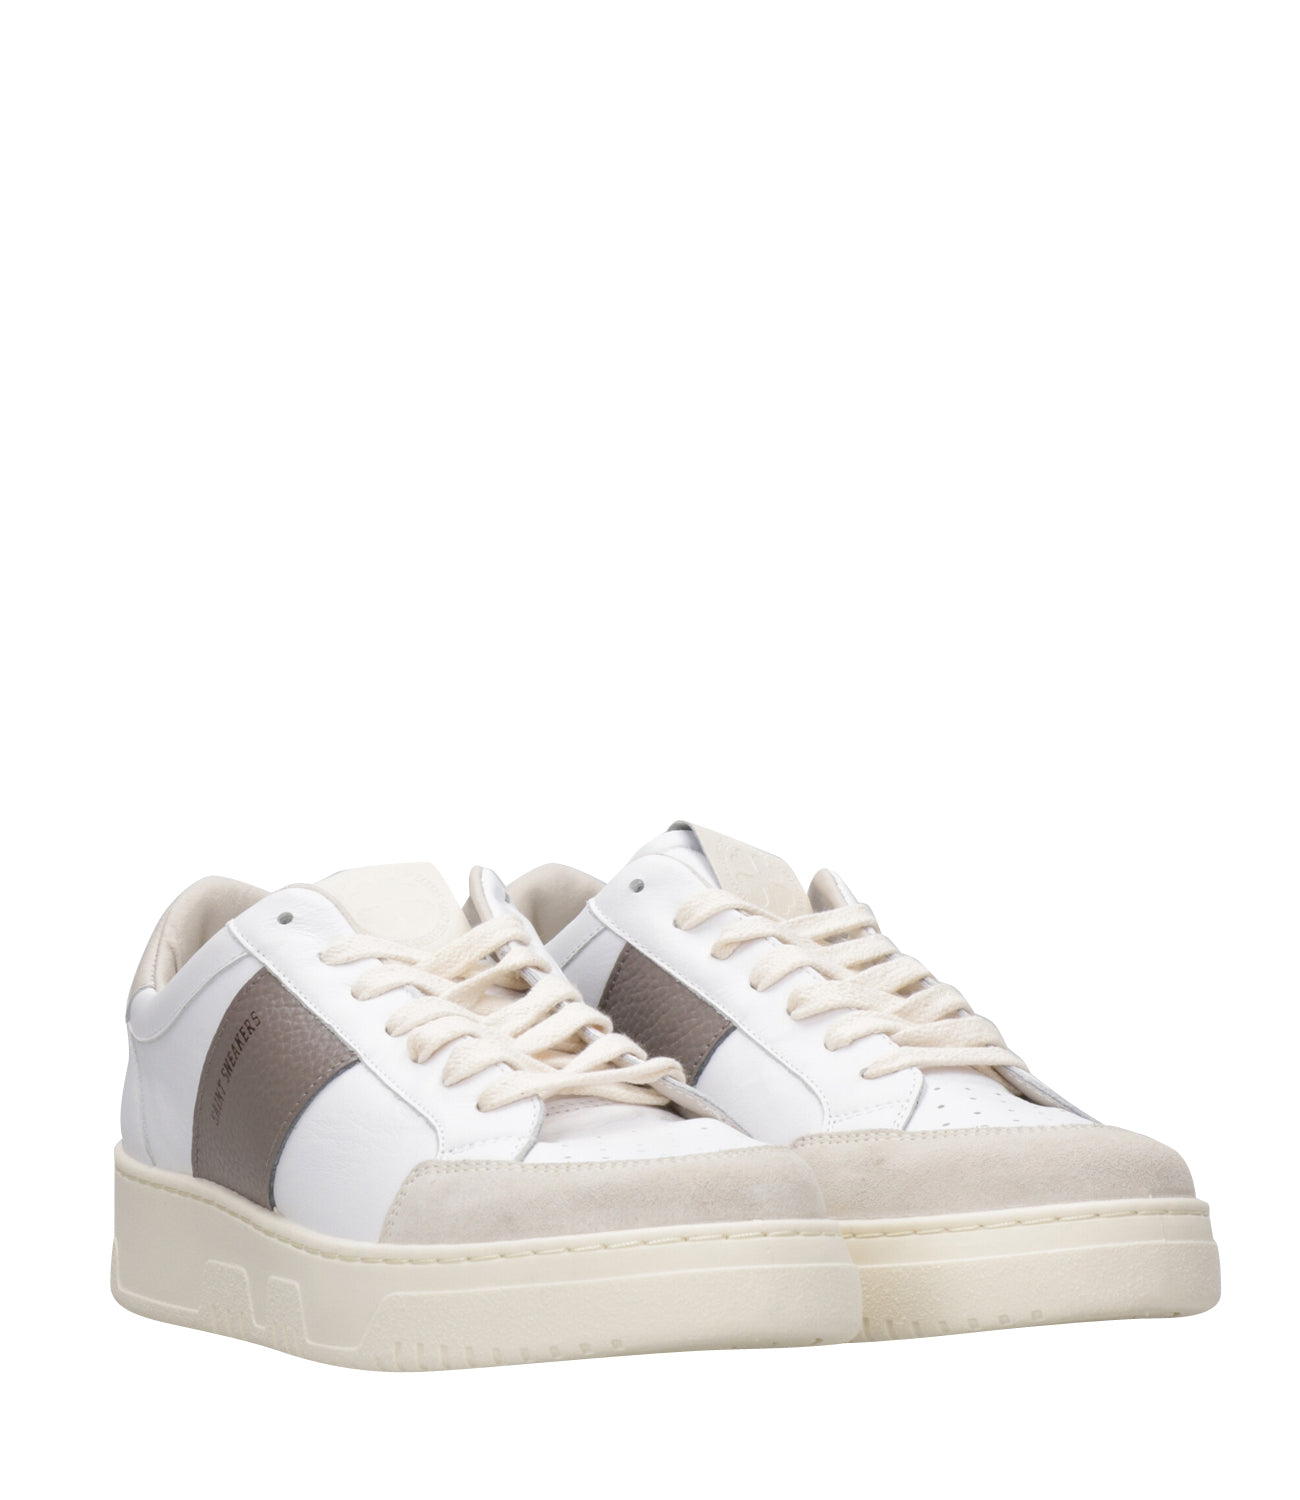 Saint Sneakers | White and Brown Sneakers